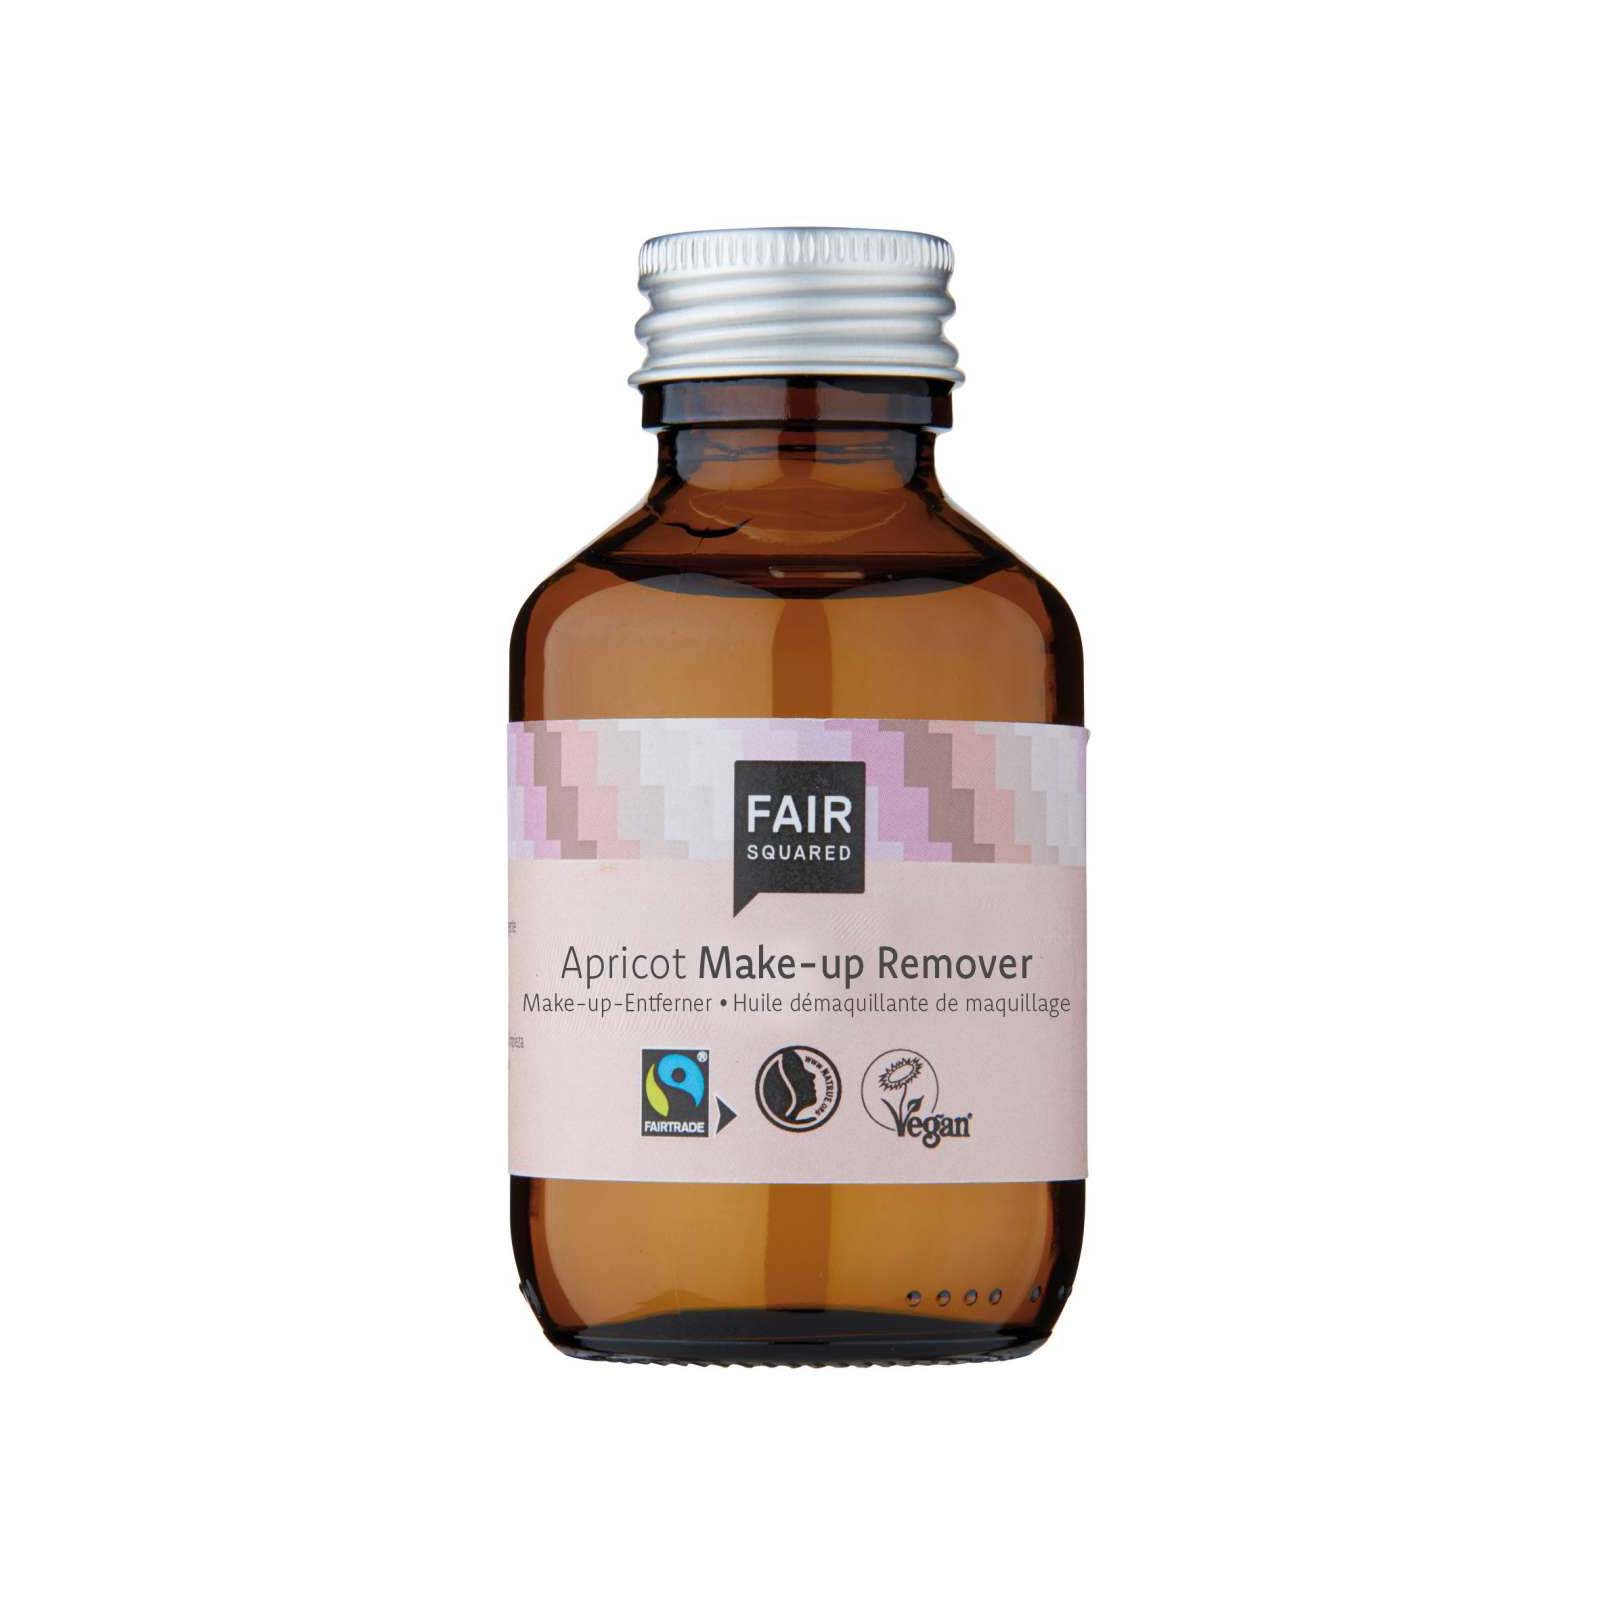 Fair Squared Apricot Make-up Remover